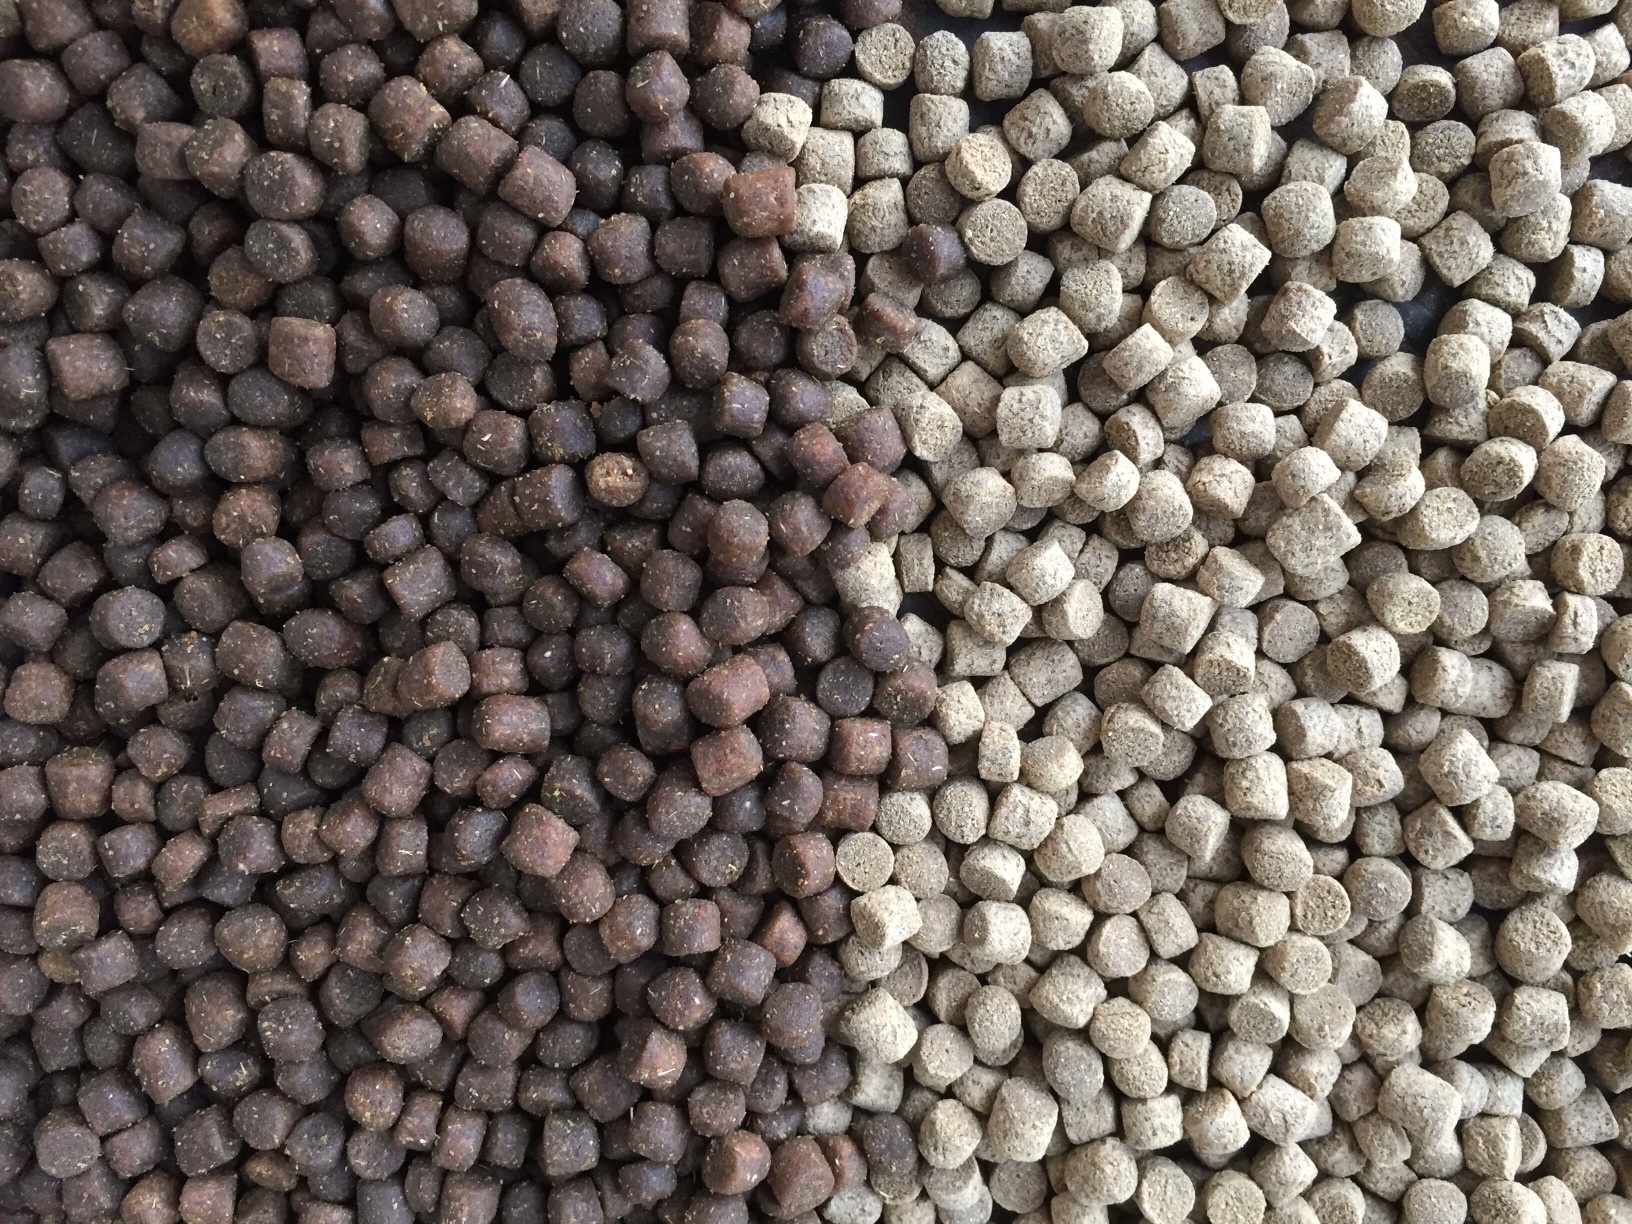 Sinking fish feed: Before and after vacuum coating